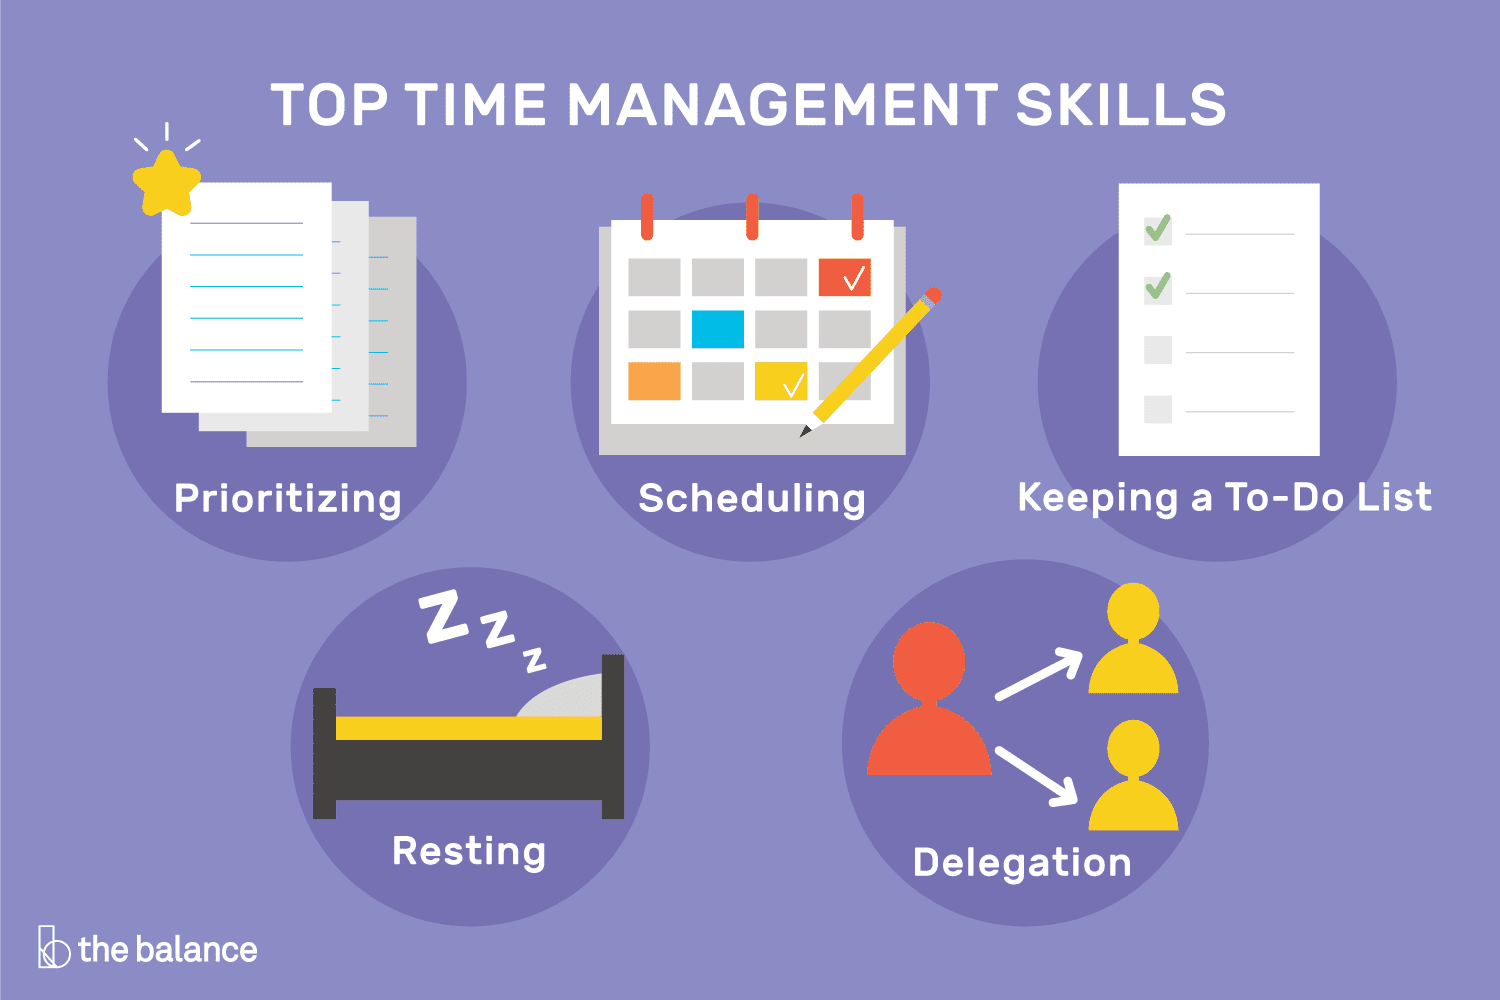 Diagram that lists Top Time Management Skills: Prioritizing, Scheduling, Keeping a To-Do List, Resting, Delegation